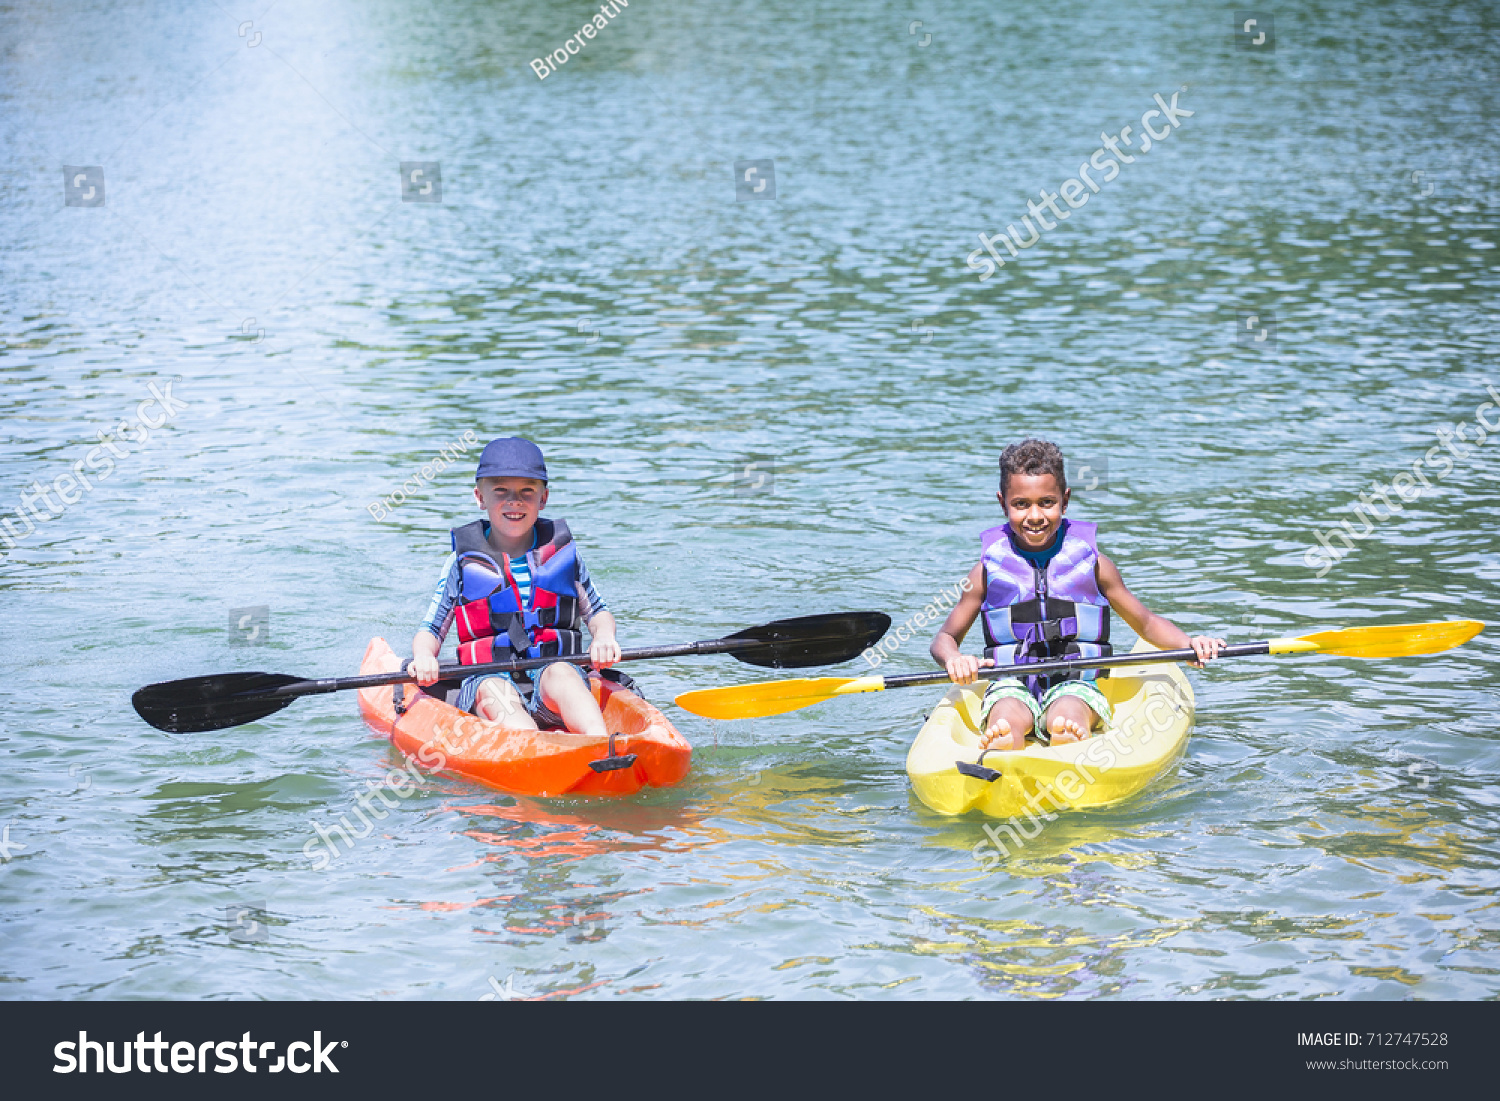 Two smiling cute diverse boys kayaking together on the lake. Having fun in the summertim #712747528